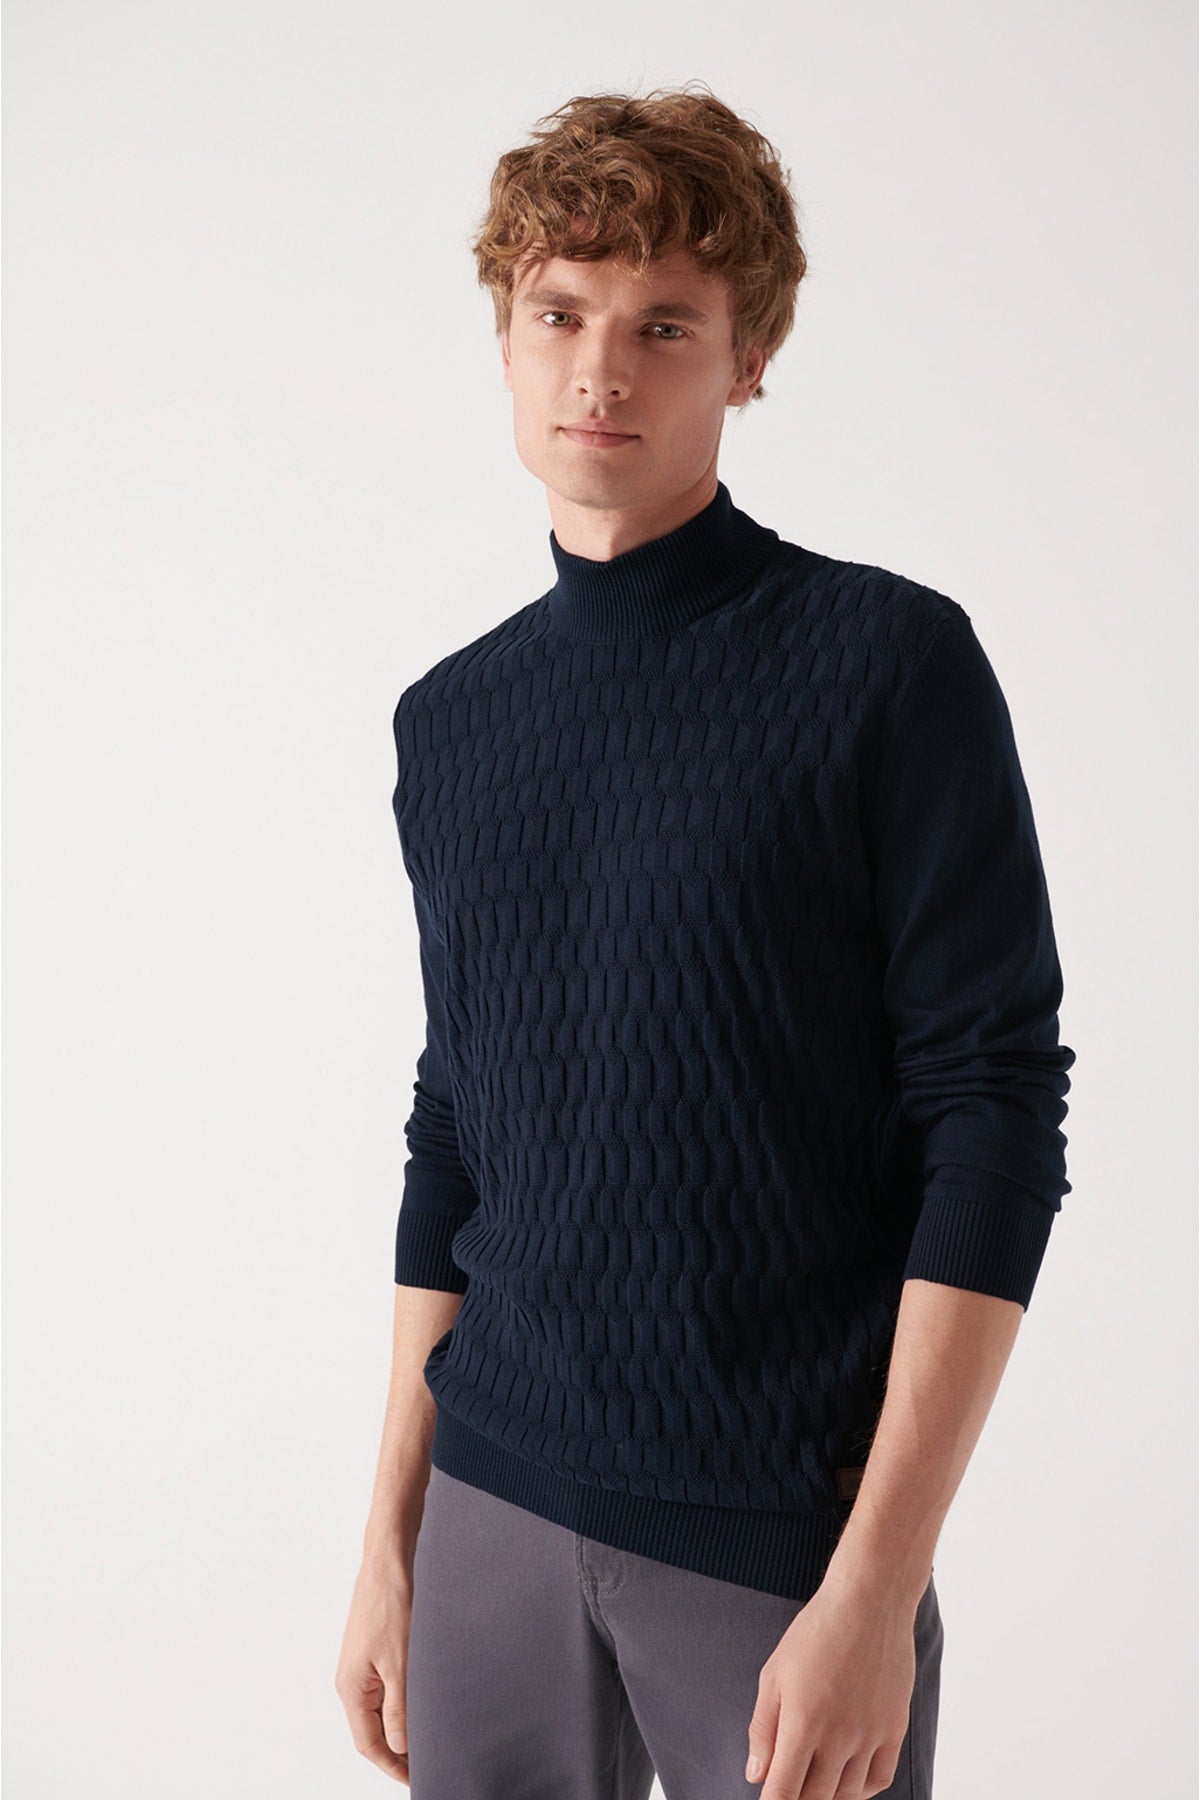 Men's navy blue half -fisherman in front of the collar textured cotton knitwear sweater E005106